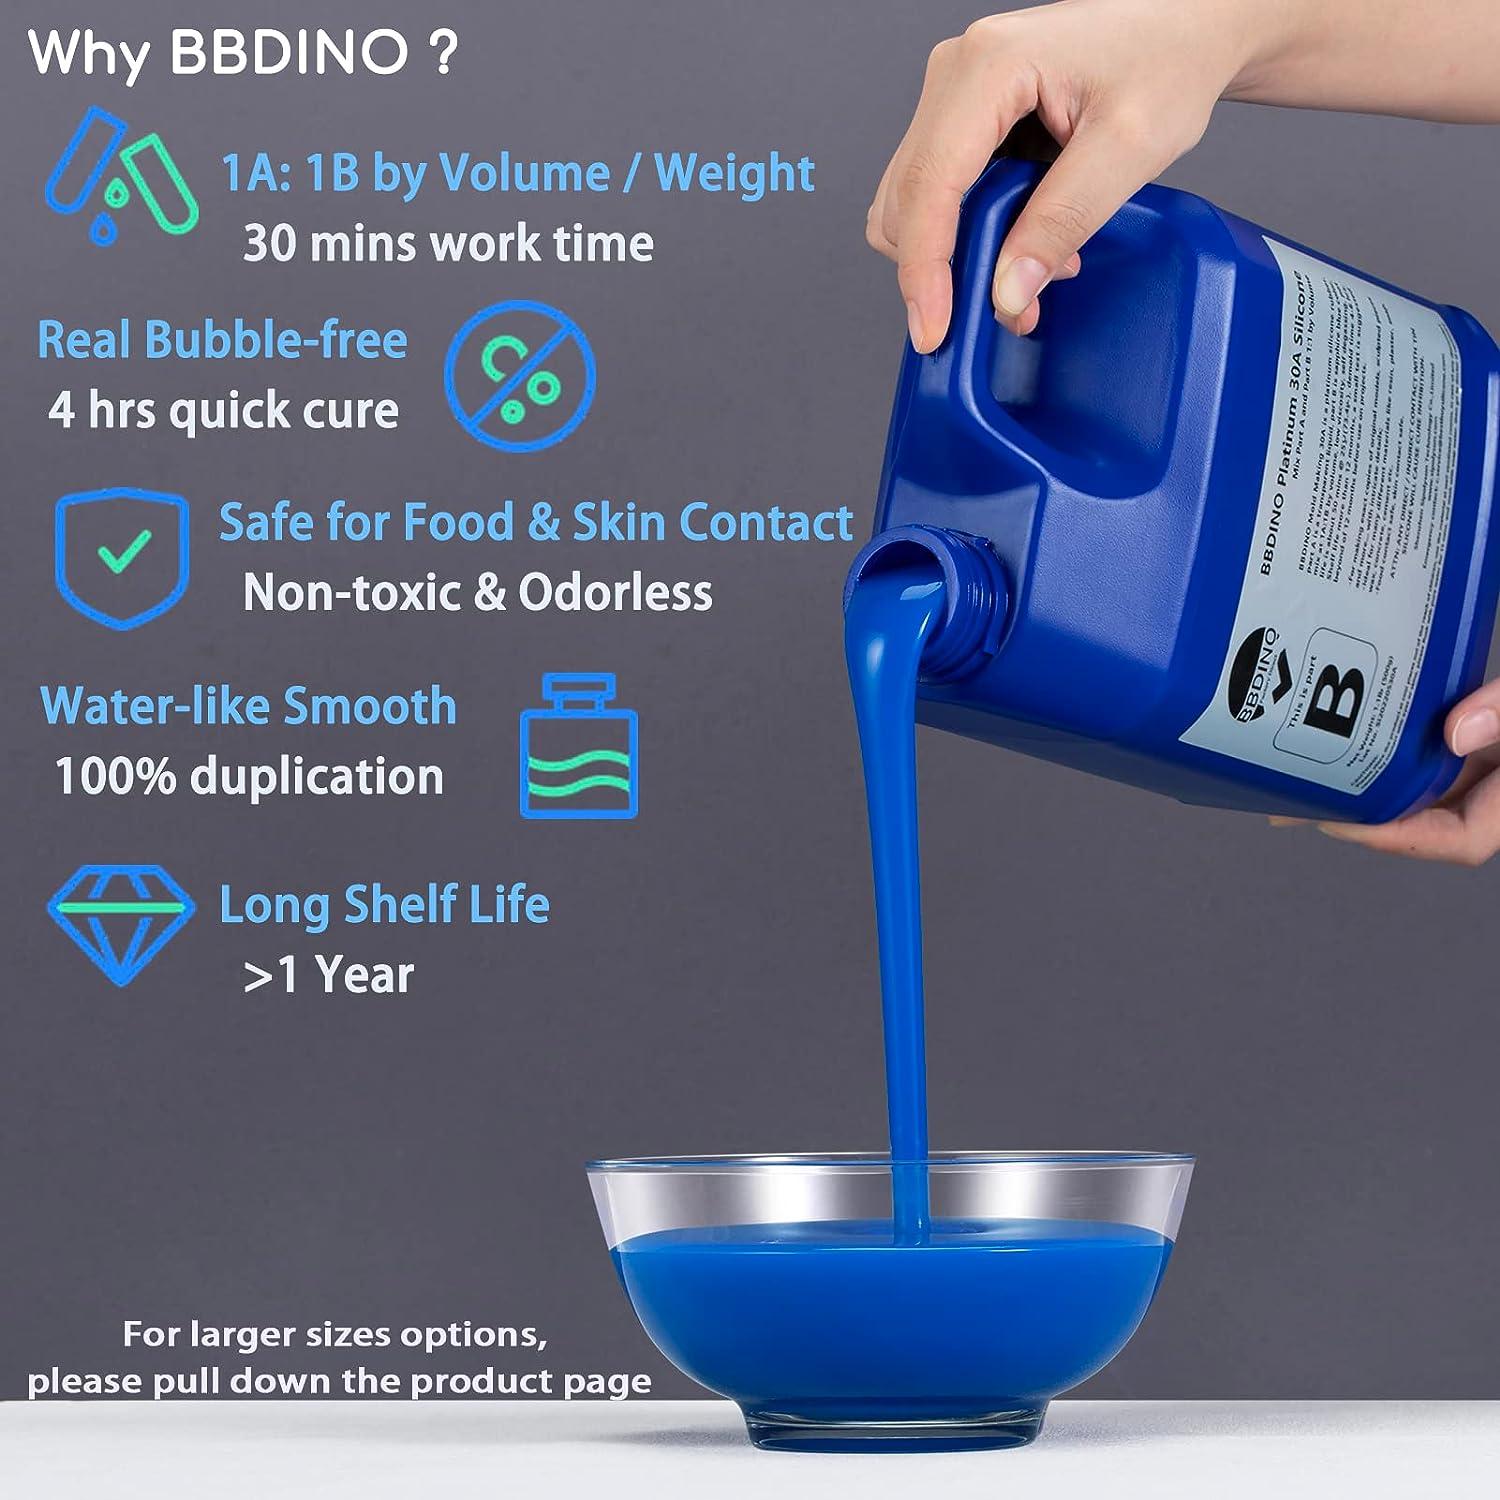 BBDINO Silicone Mold Making Kit, Liquid Silicone for Mold Making 30A NW 42  Oz, Platinum Mold Making Silicone Rubber, 1:1 by Volume, Ideal for Casting